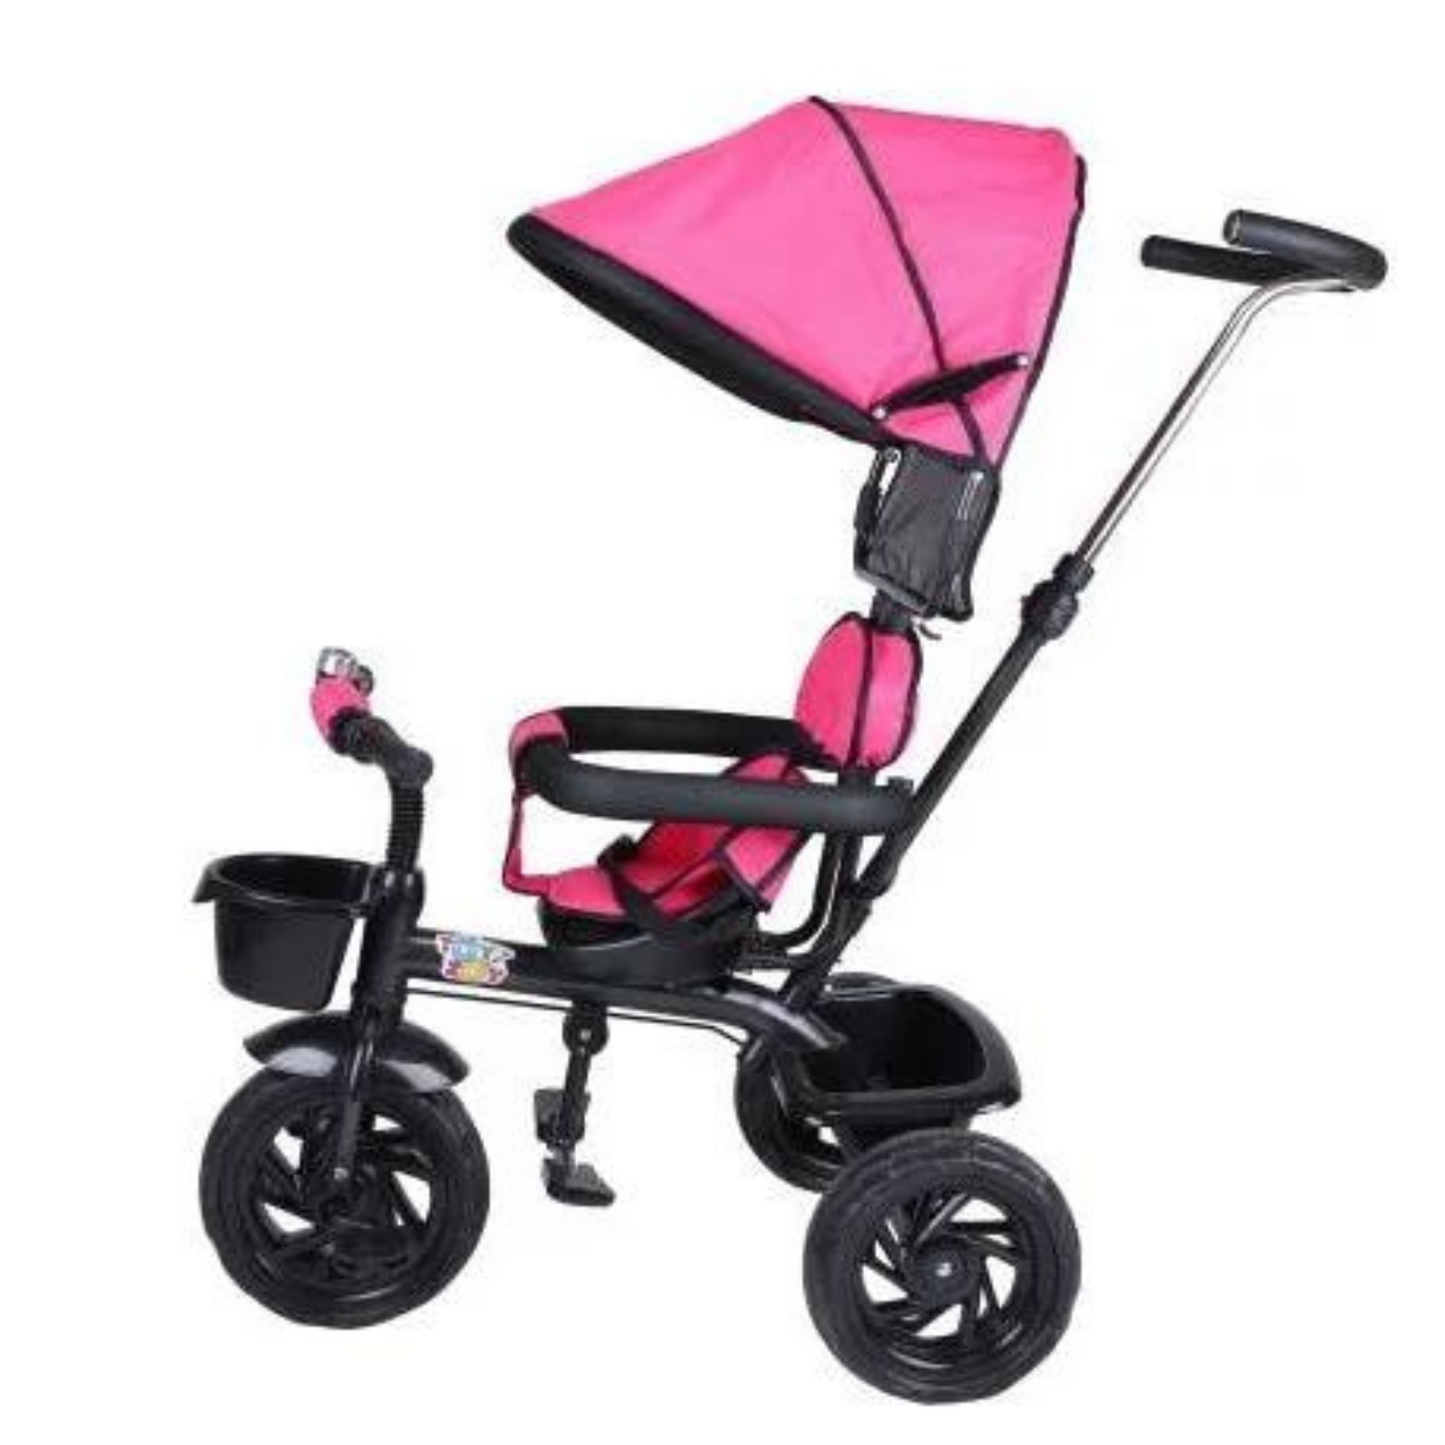 TOYZOY Baby Tricycle 532 With Protective Canopy, Suitable for 1.5-4 Years Fun & Safe Ride for Toddlers  Vibrant Color